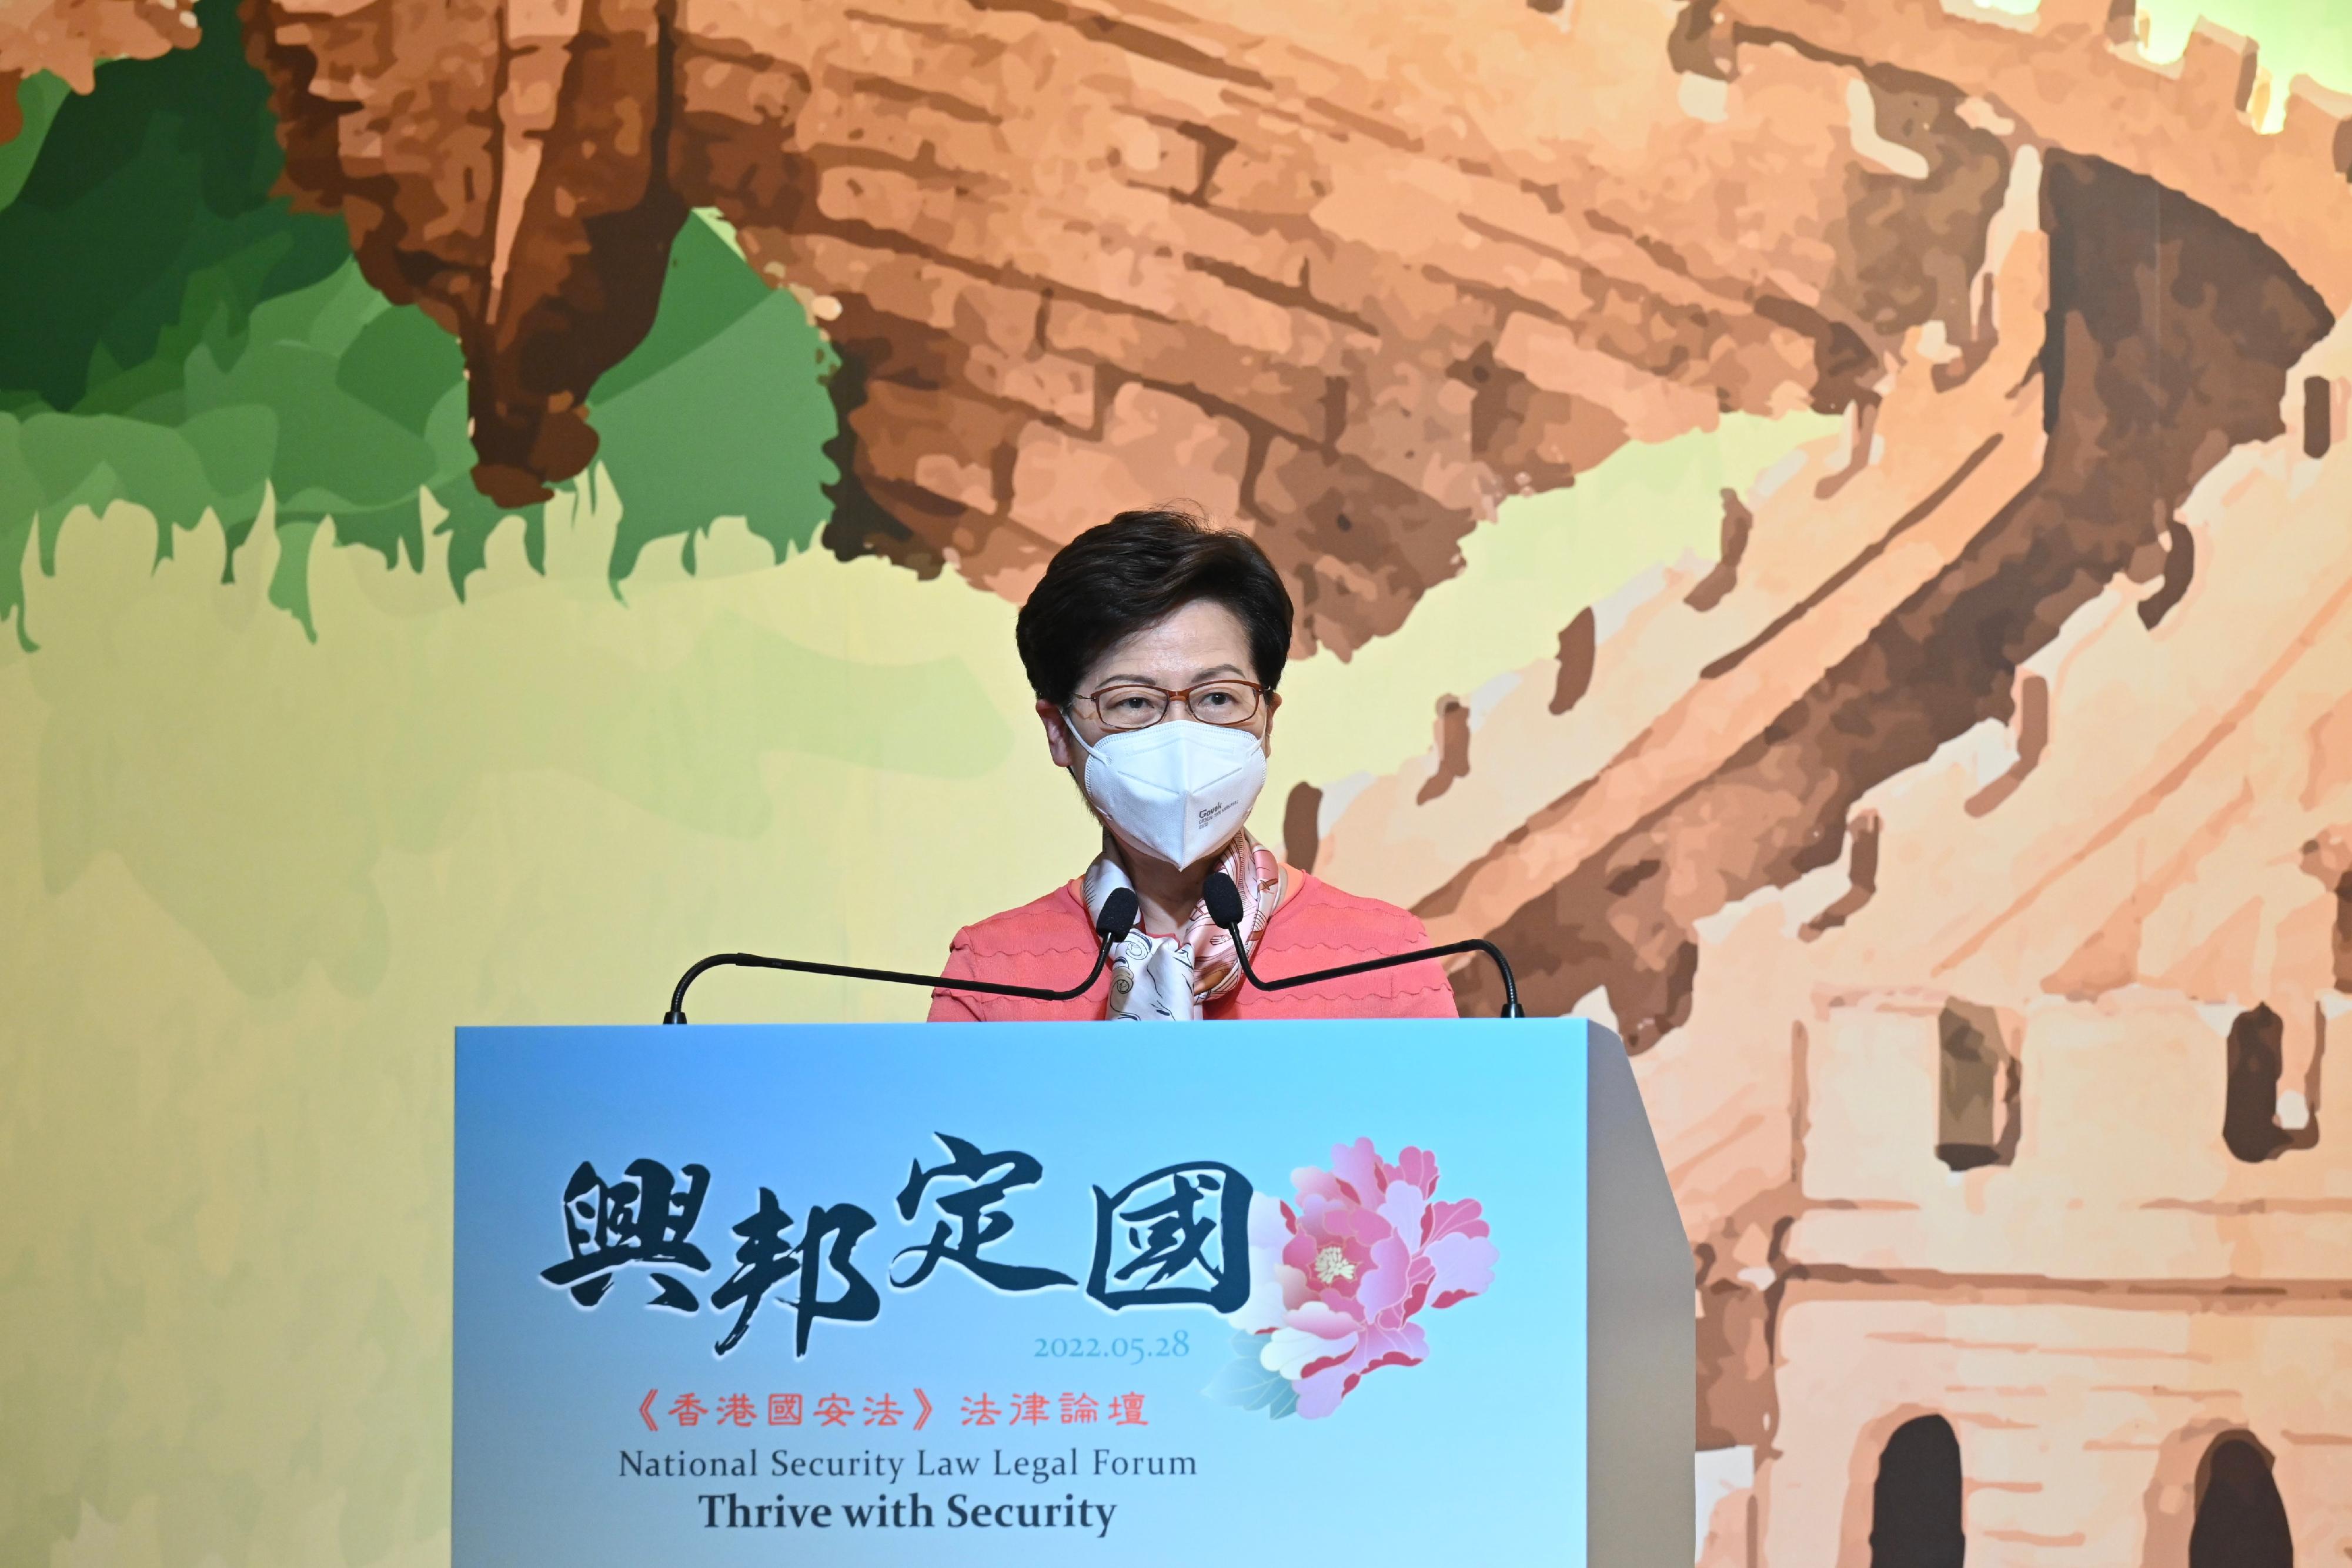 The Chief Executive, Mrs Carrie Lam, speaks at the National Security Law Legal Forum "Thrive with Security" today (May 28).